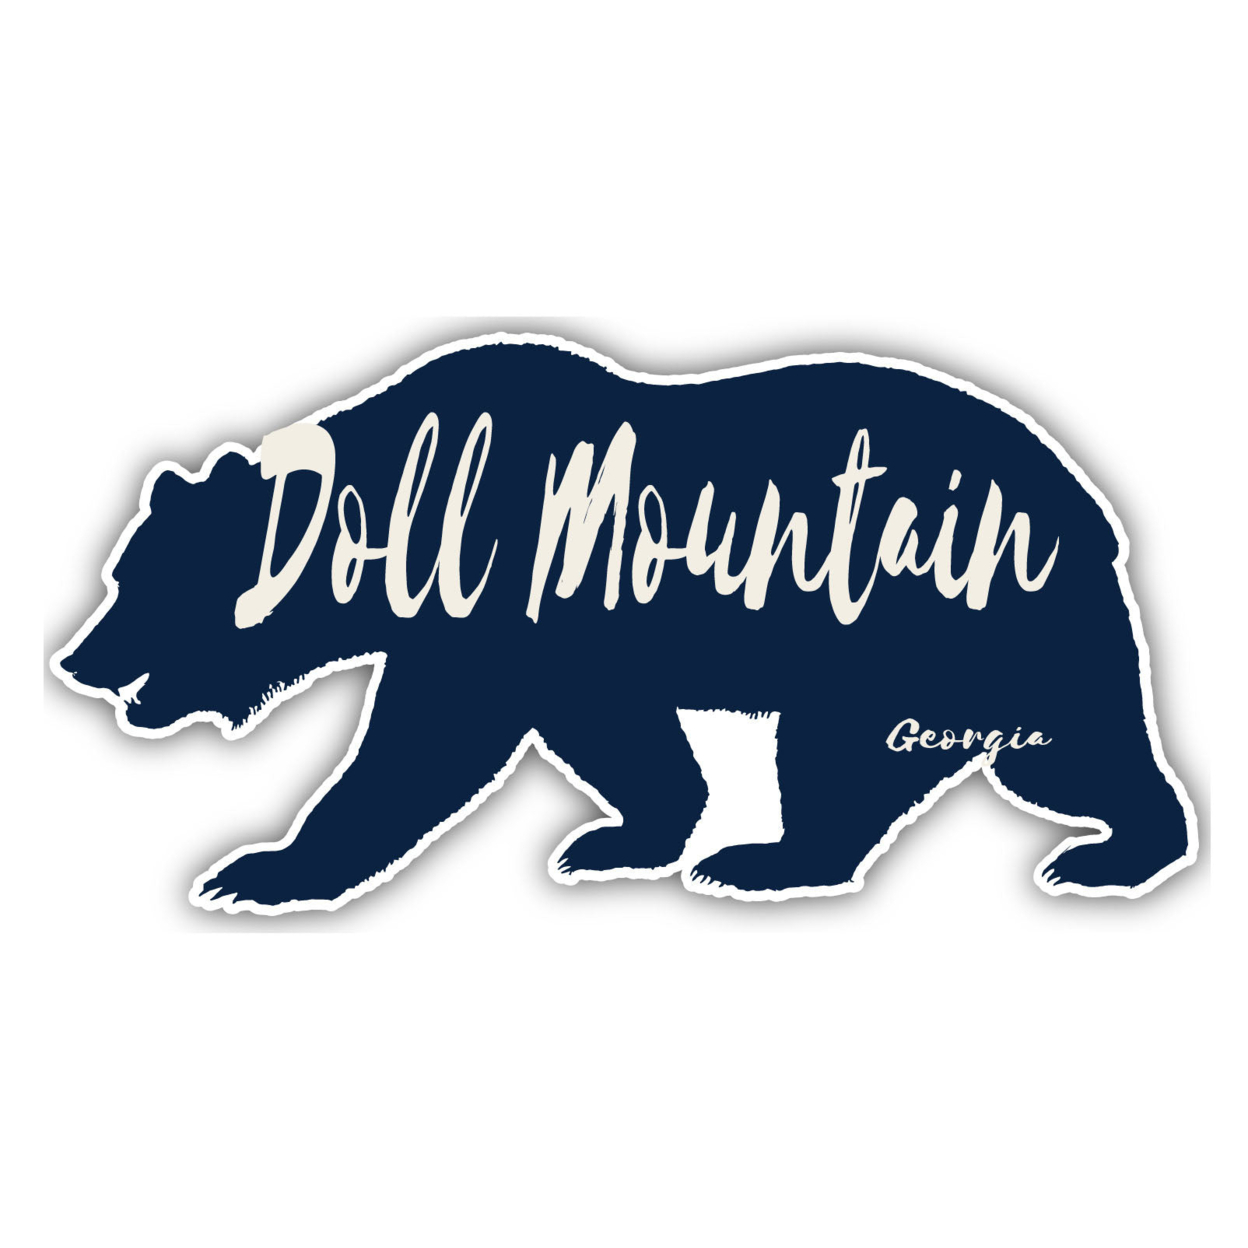 Doll Mountain Georgia Souvenir Decorative Stickers (Choose Theme And Size) - 4-Pack, 4-Inch, Bear